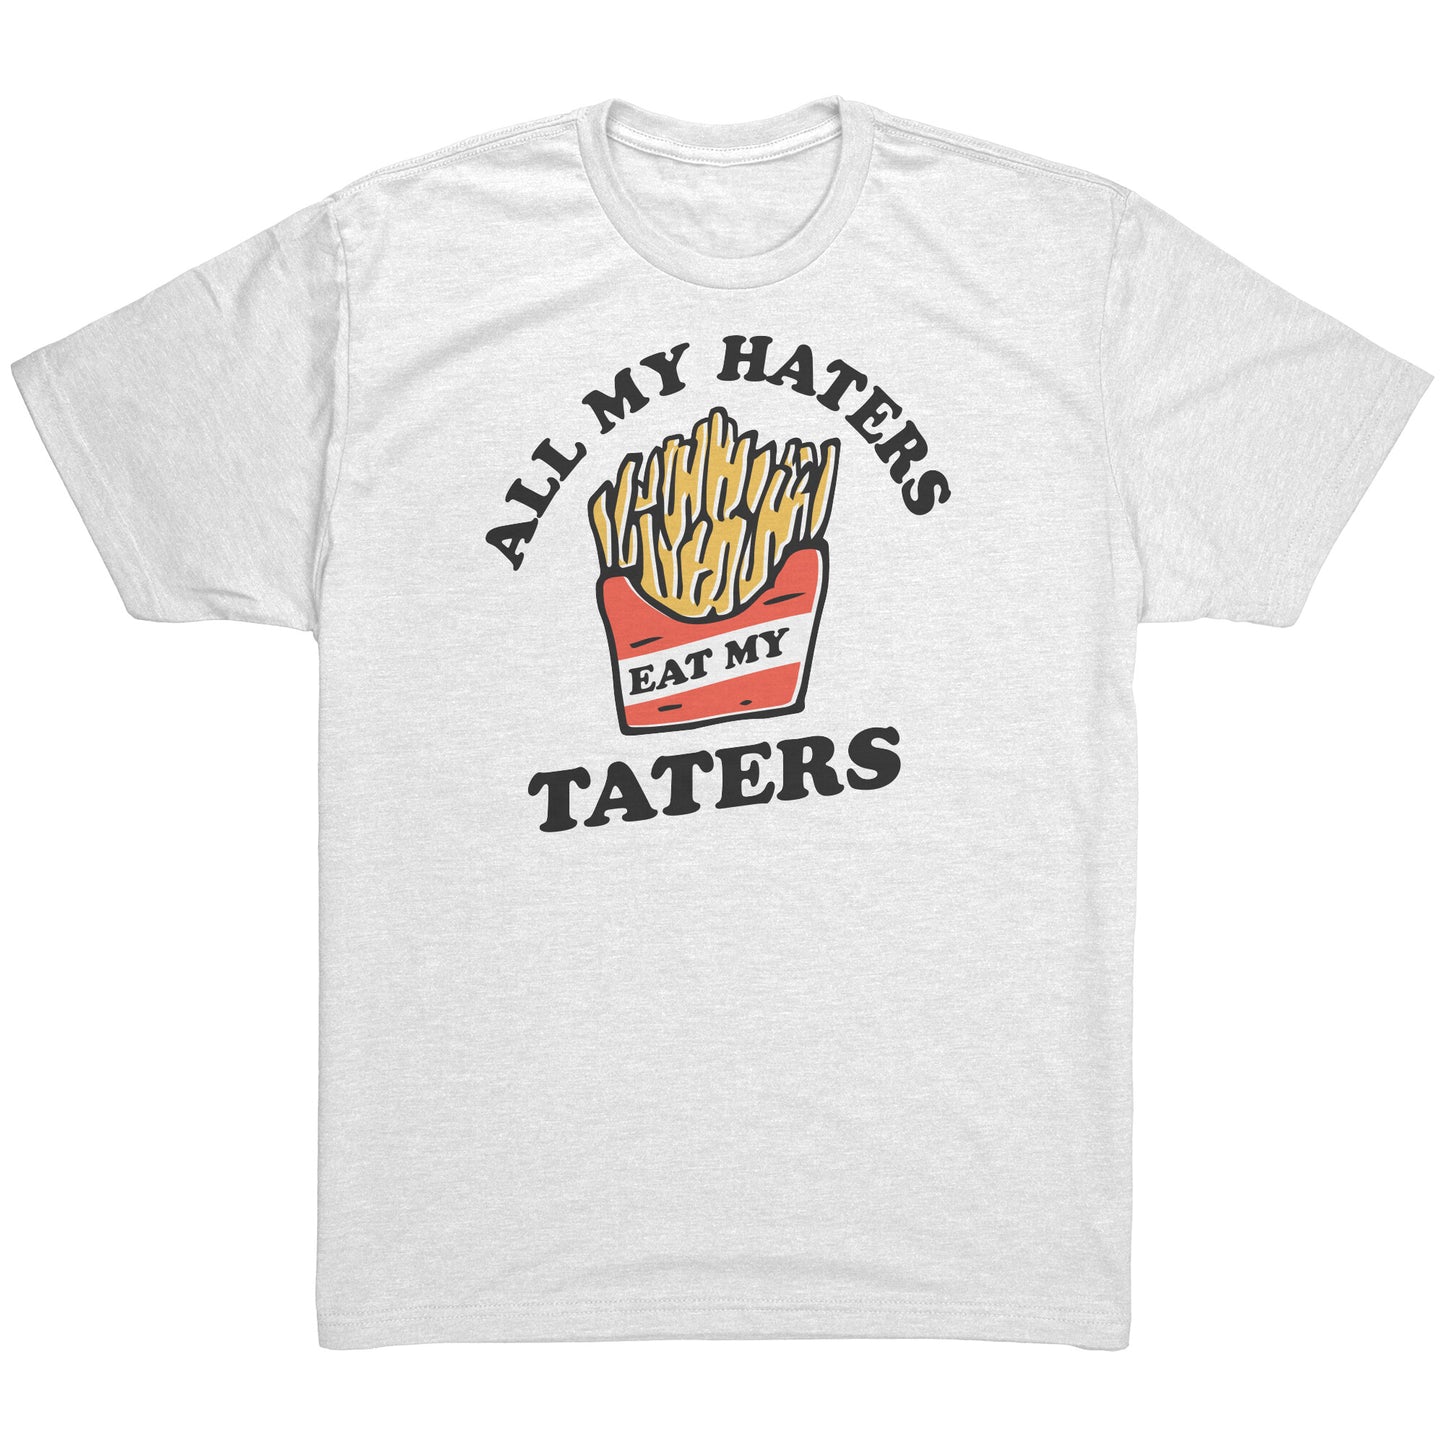 All my Haters Eat my Taters - T Shirt